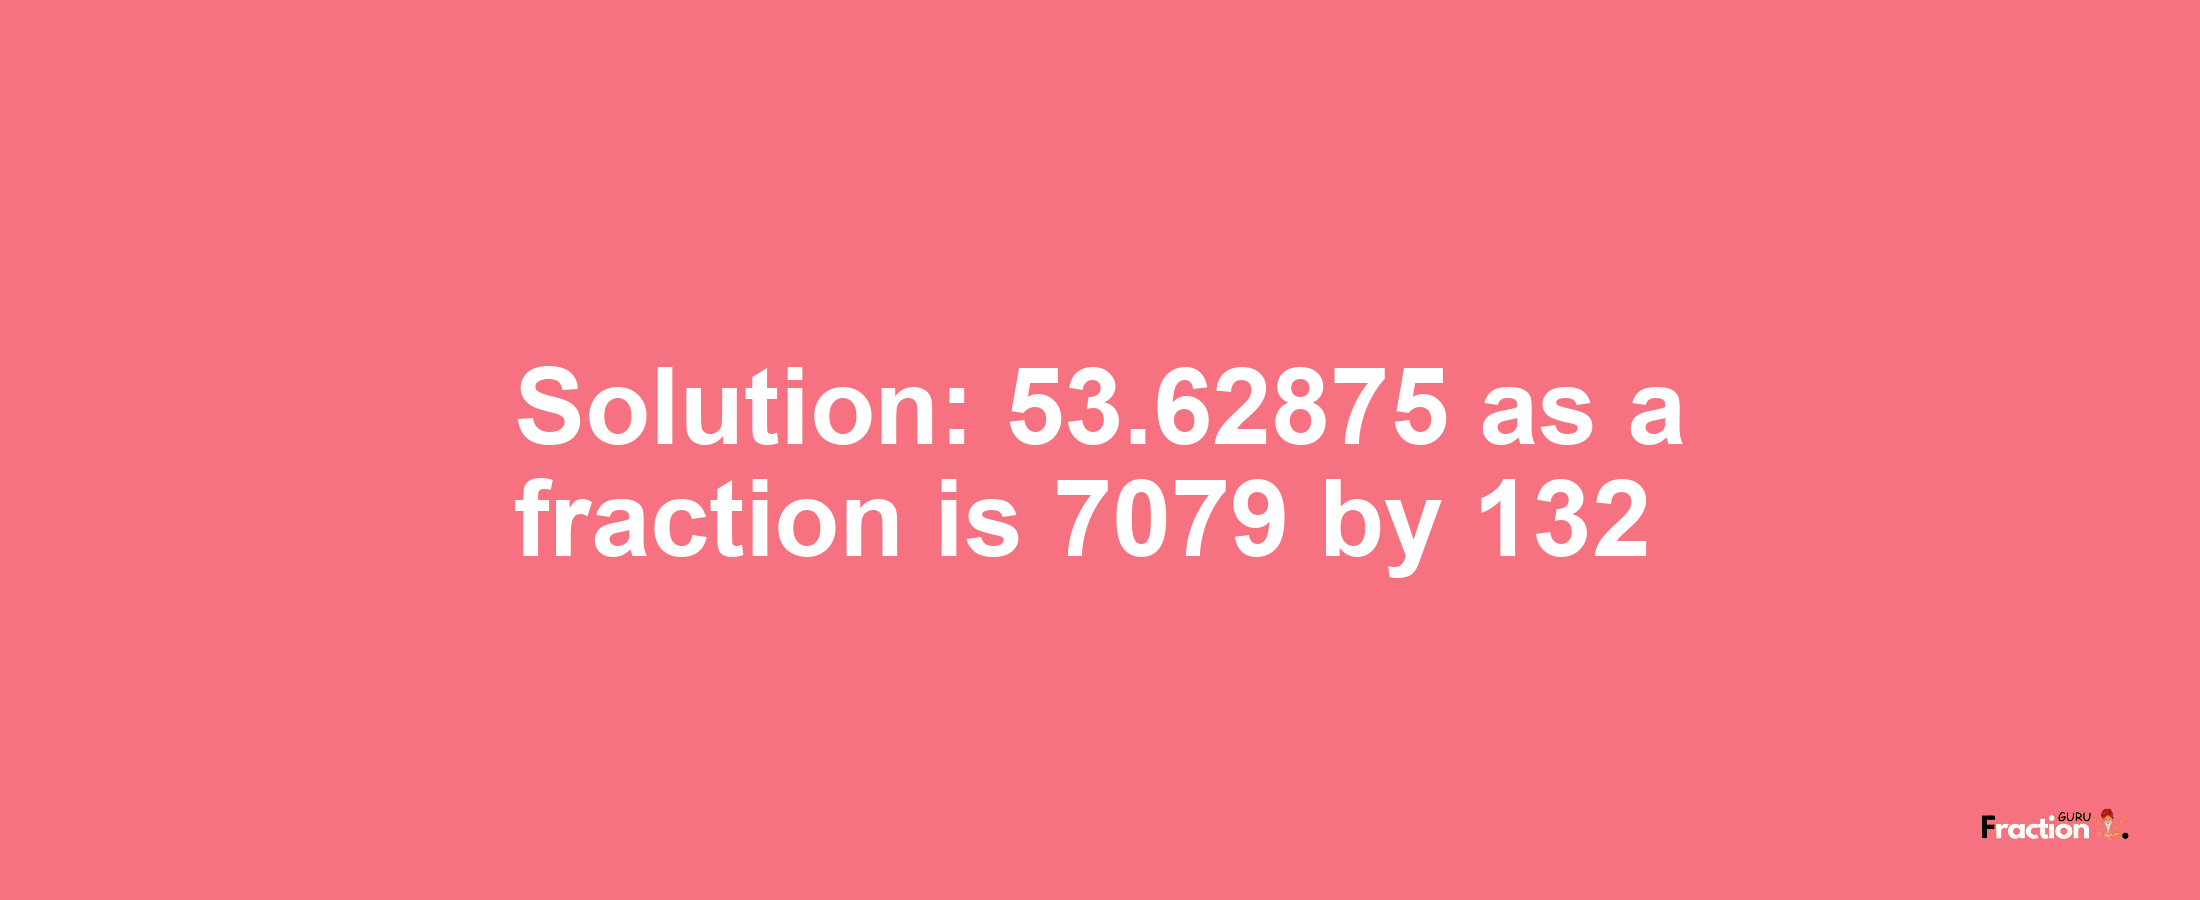 Solution:53.62875 as a fraction is 7079/132